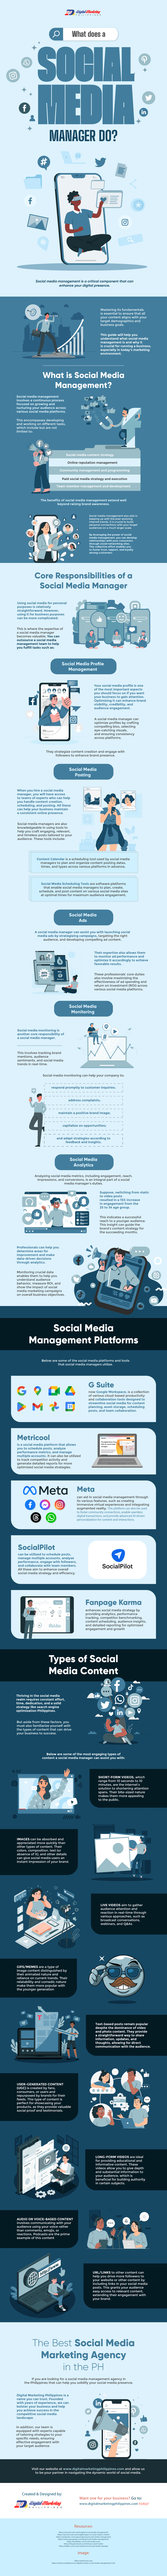 What Does a Social Media Manager Do? infographic